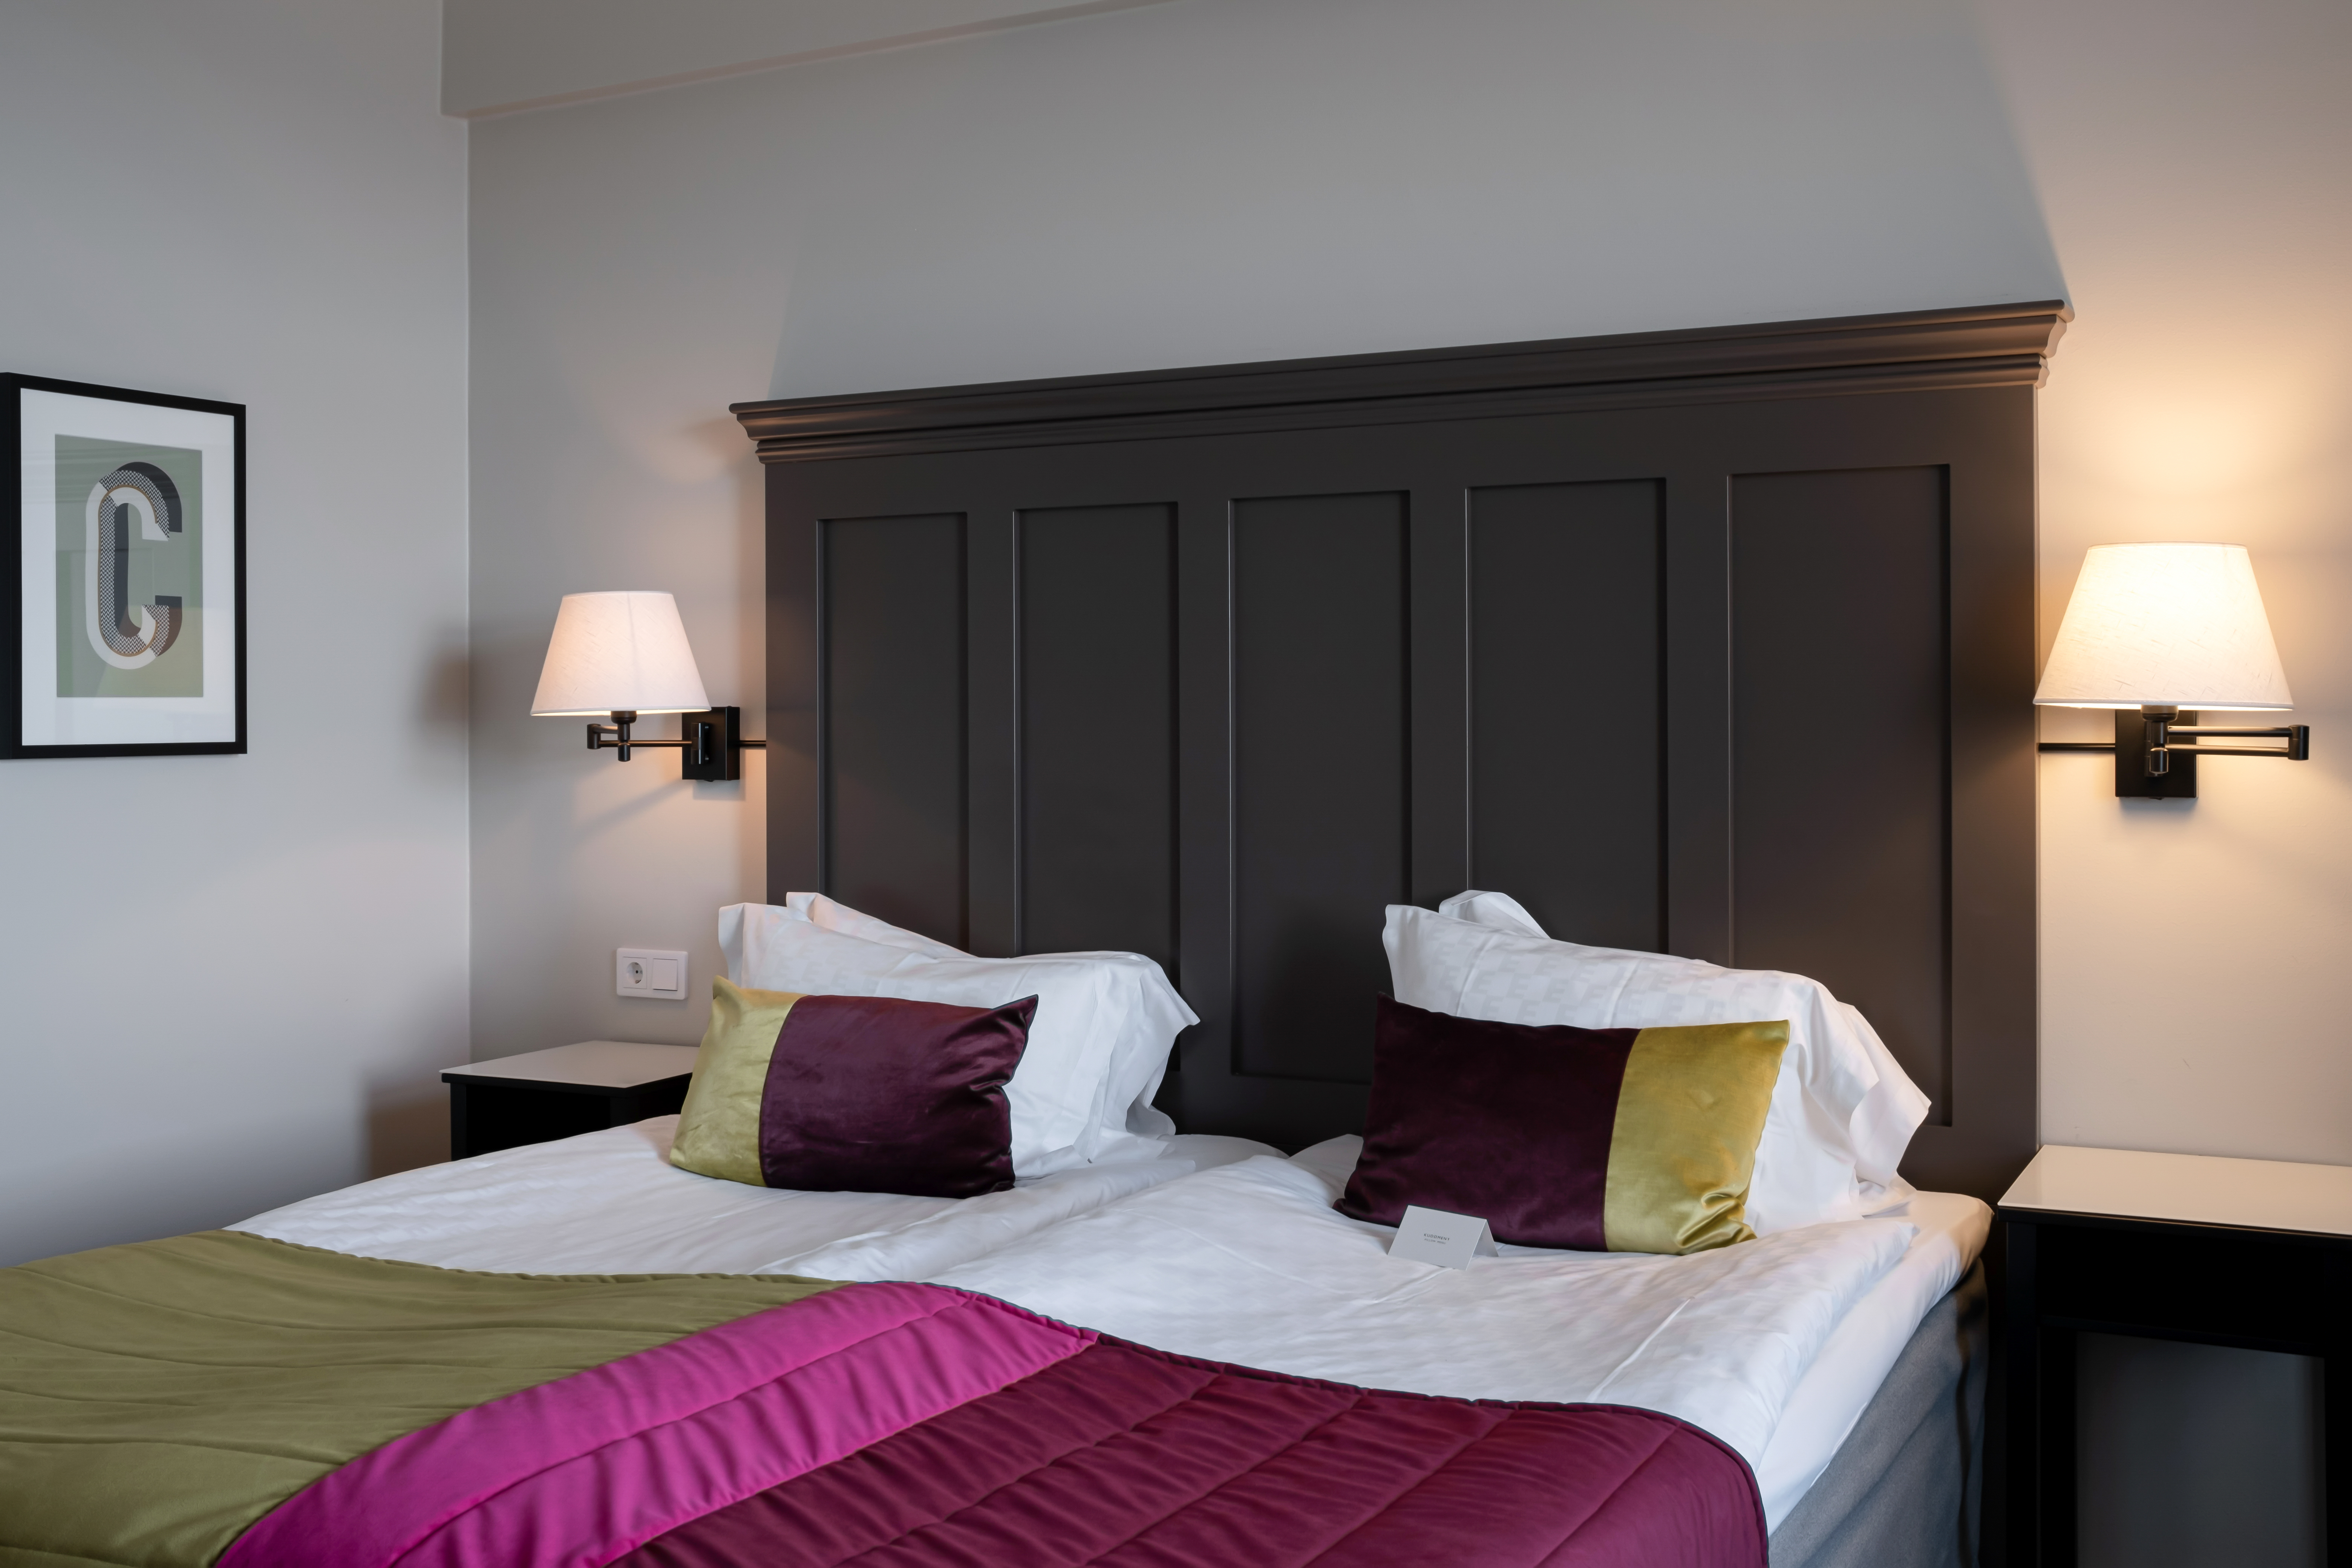 Hotel room with bed, large wooden headboard and painting